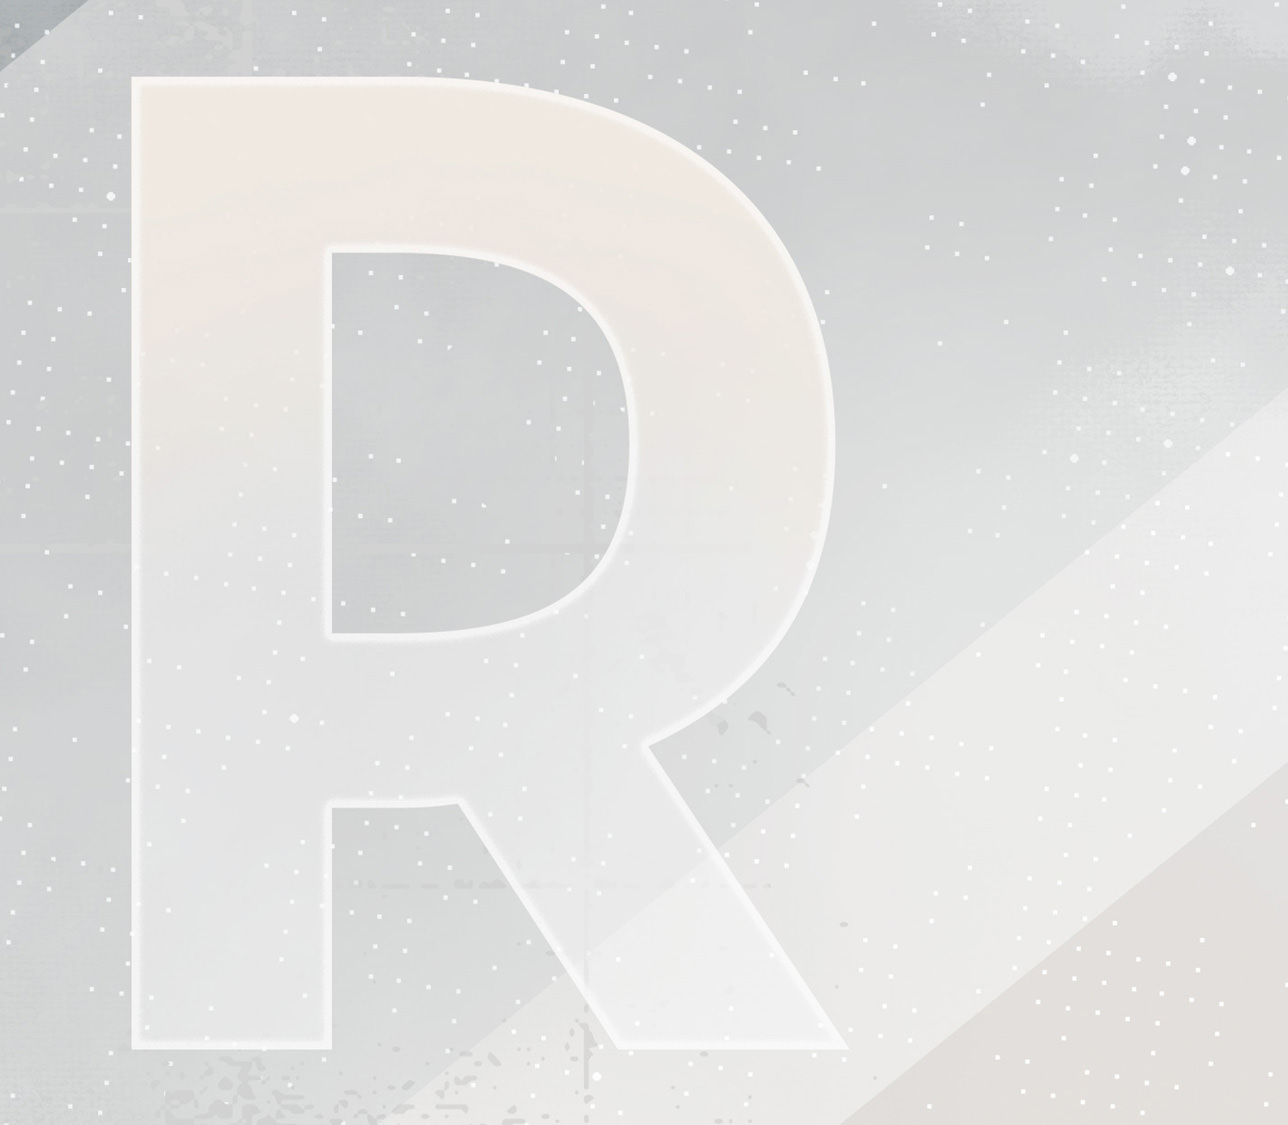 Detail of the letter R from SOAR